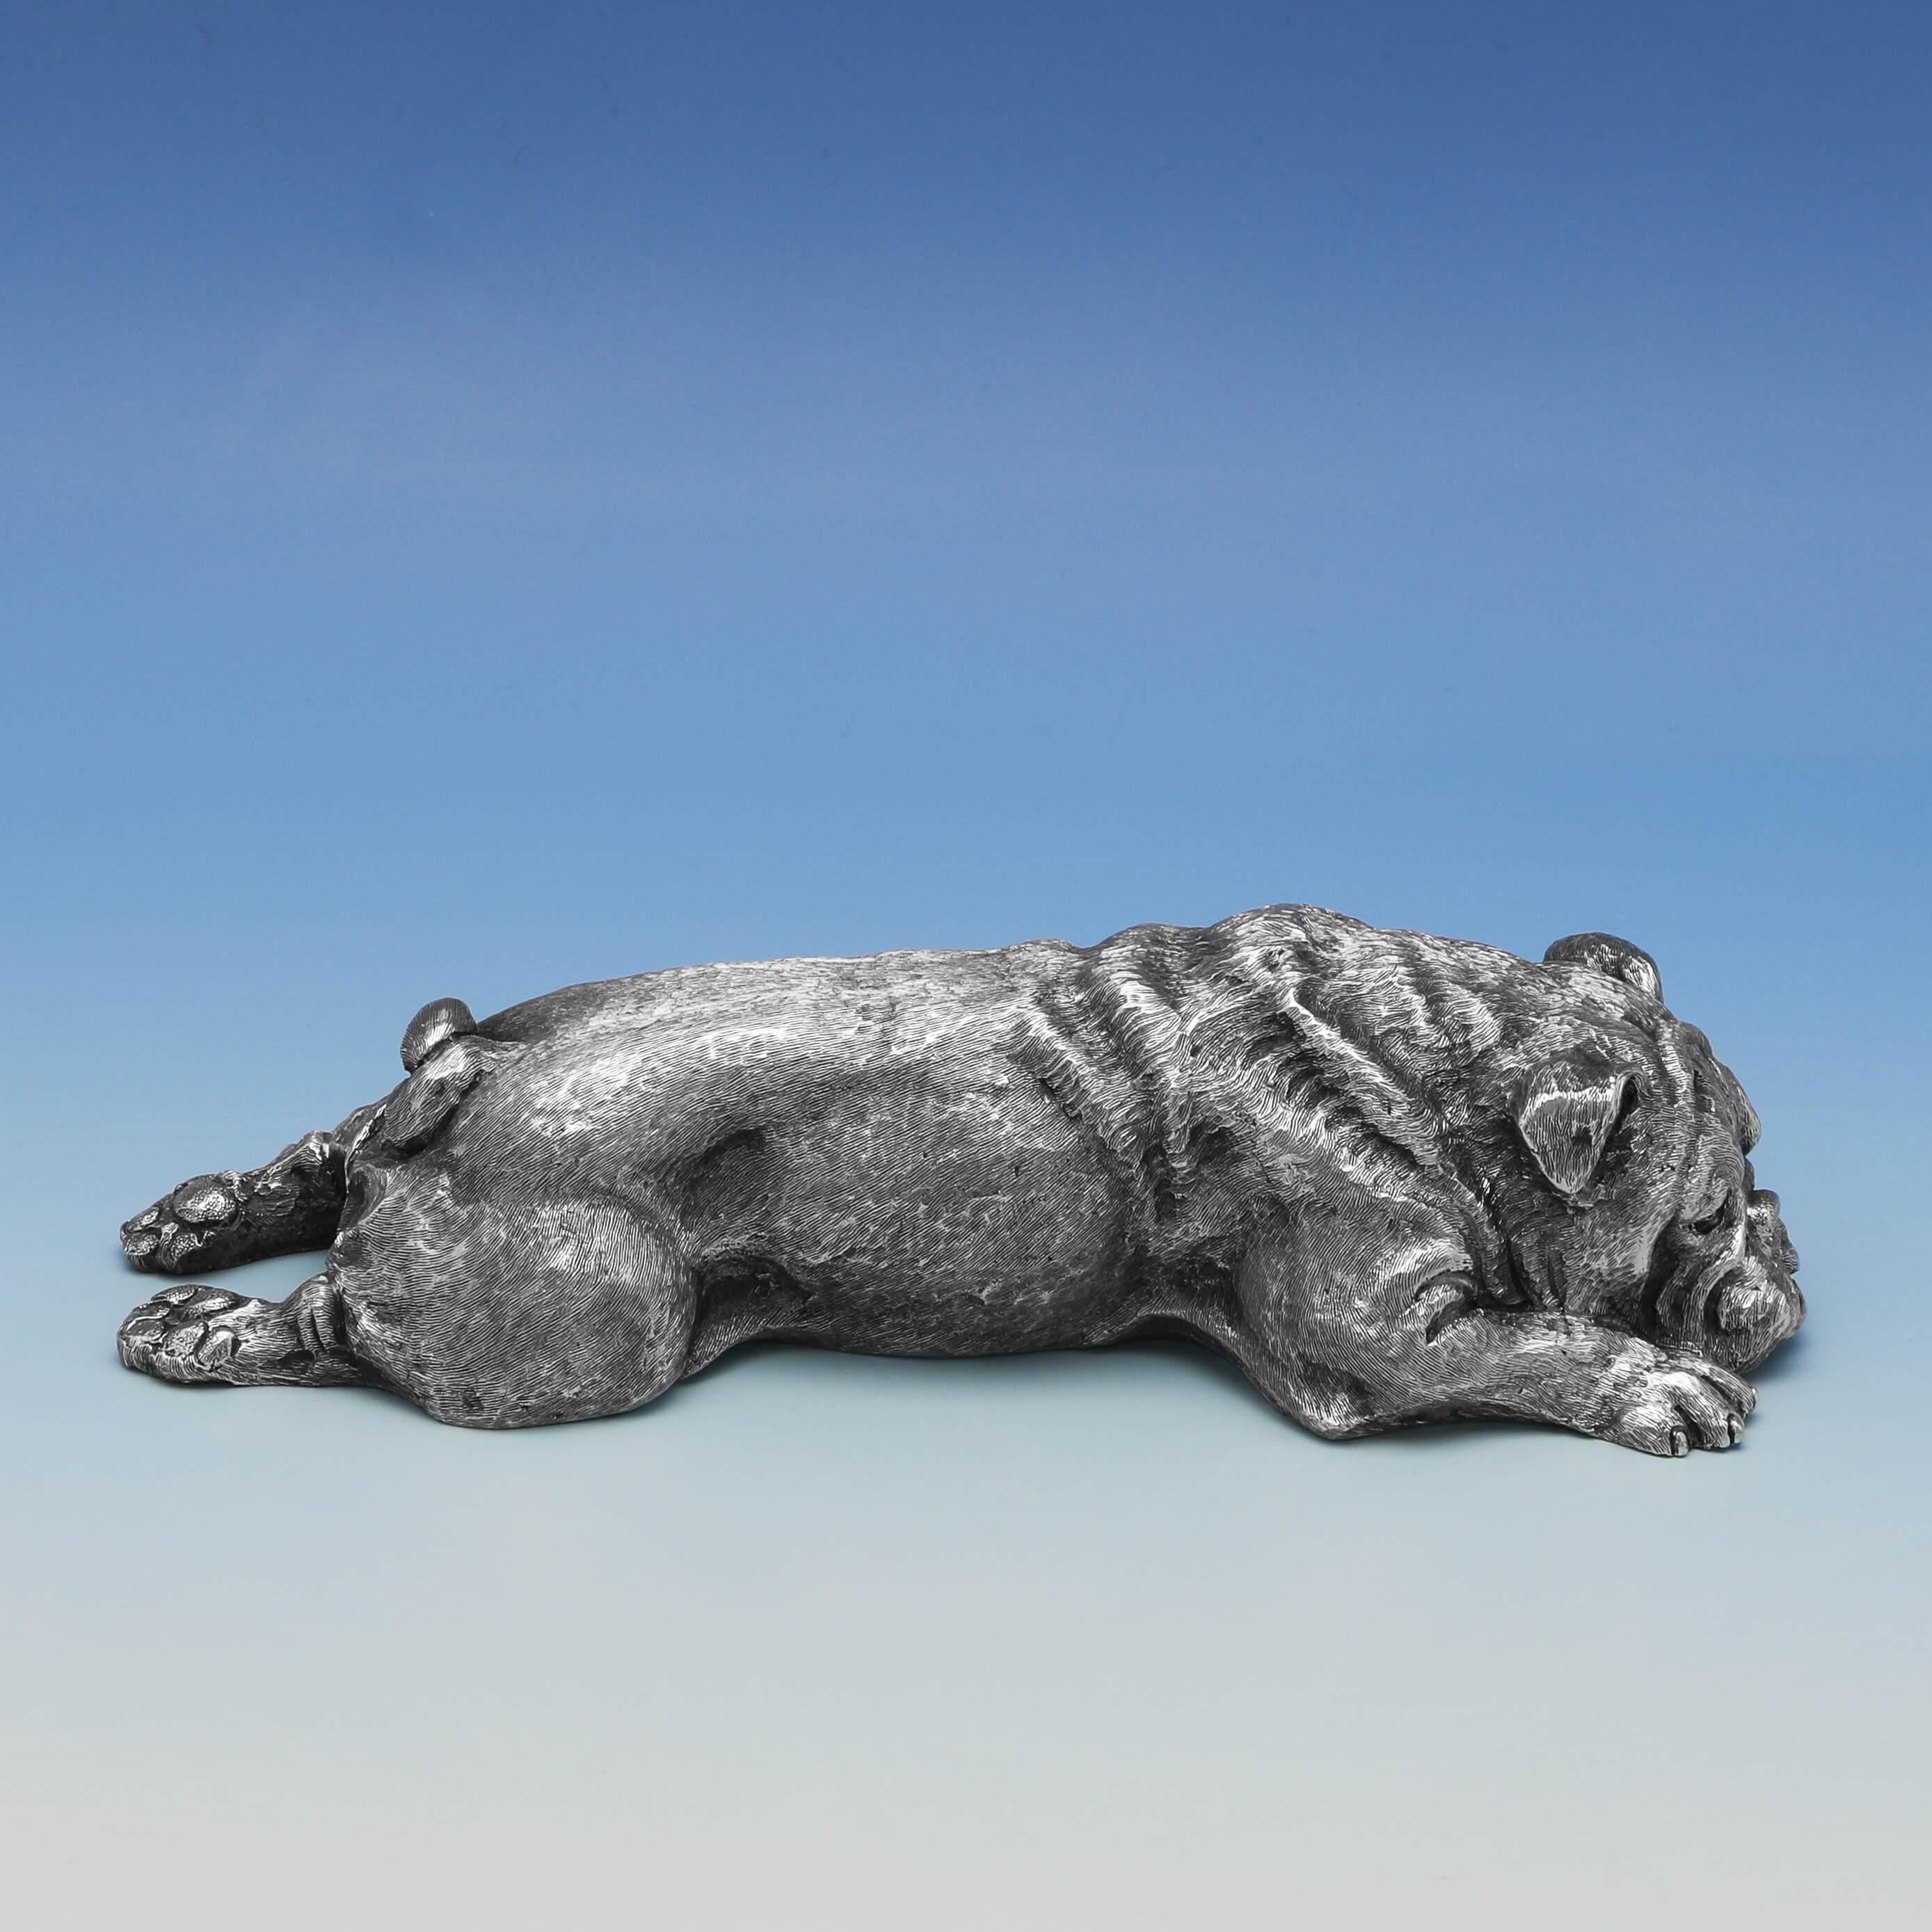 Hallmarked in London in 1976, this wonderful, sterling silver model of a bulldog, is exquisitely cast and hand finished in a recumbent position, showing a very high level of detail. The bulldog measures 1.5